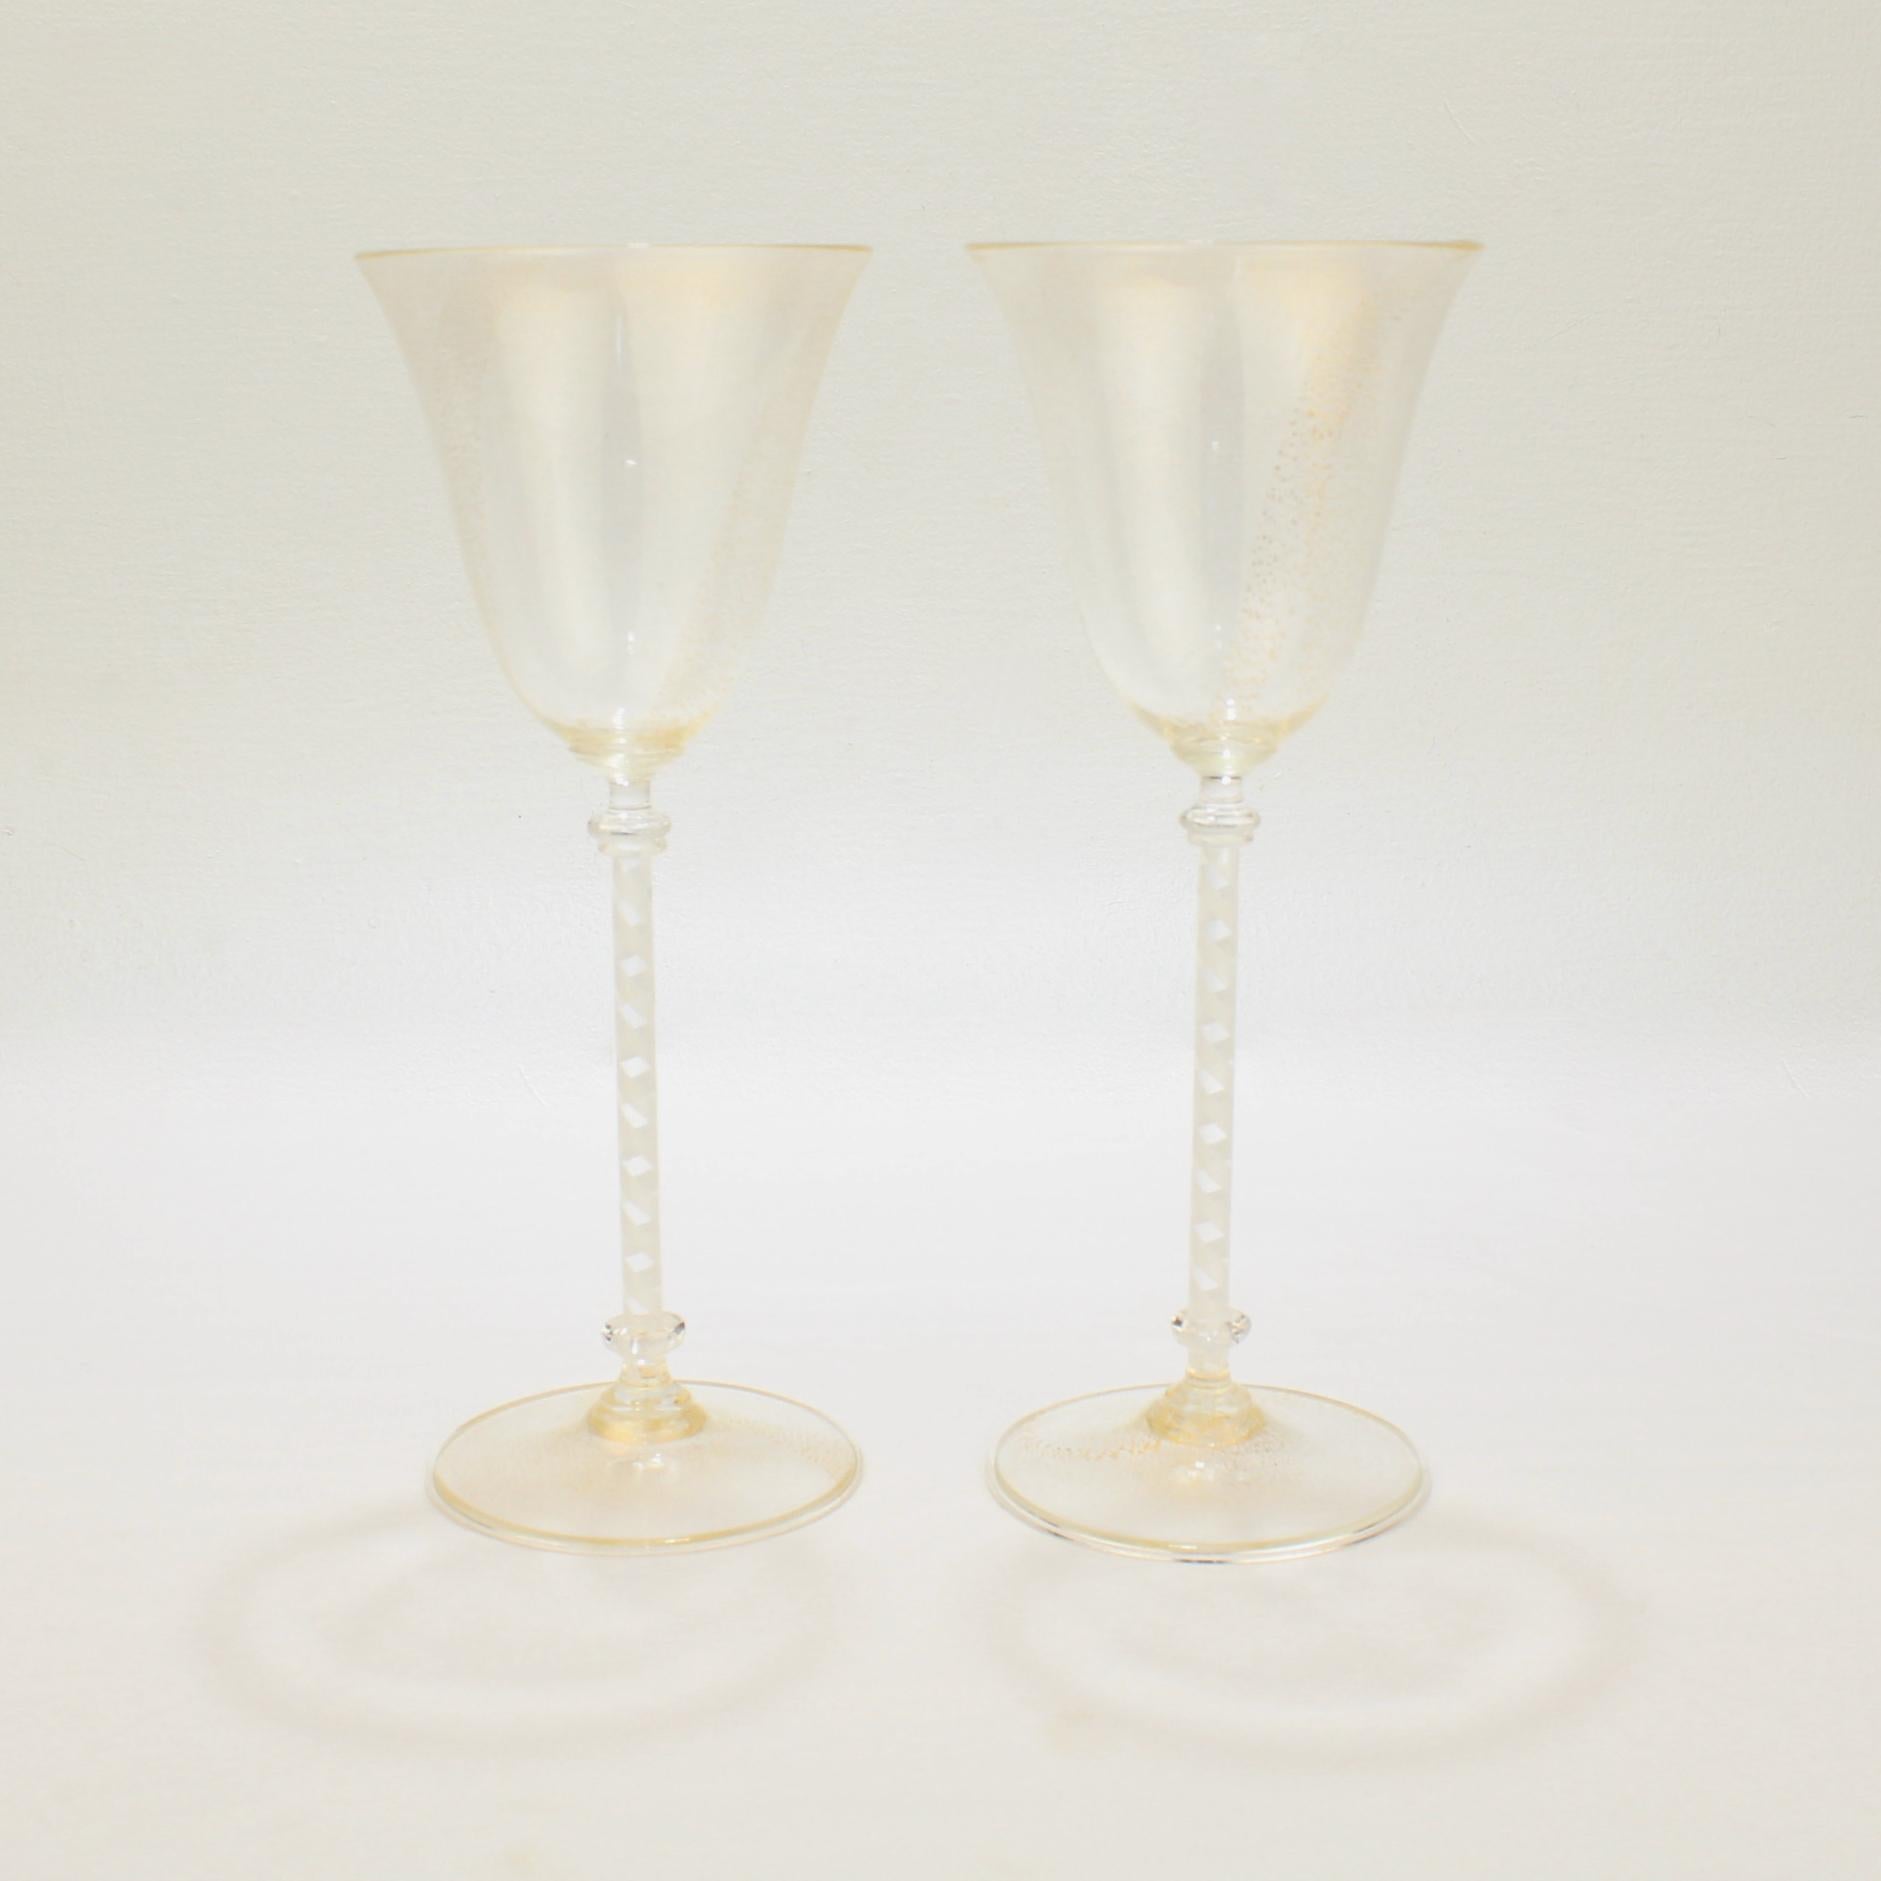 Italian Pair of Venetian Glass Wine Goblets with White Twist Stems and Gold Inclusions